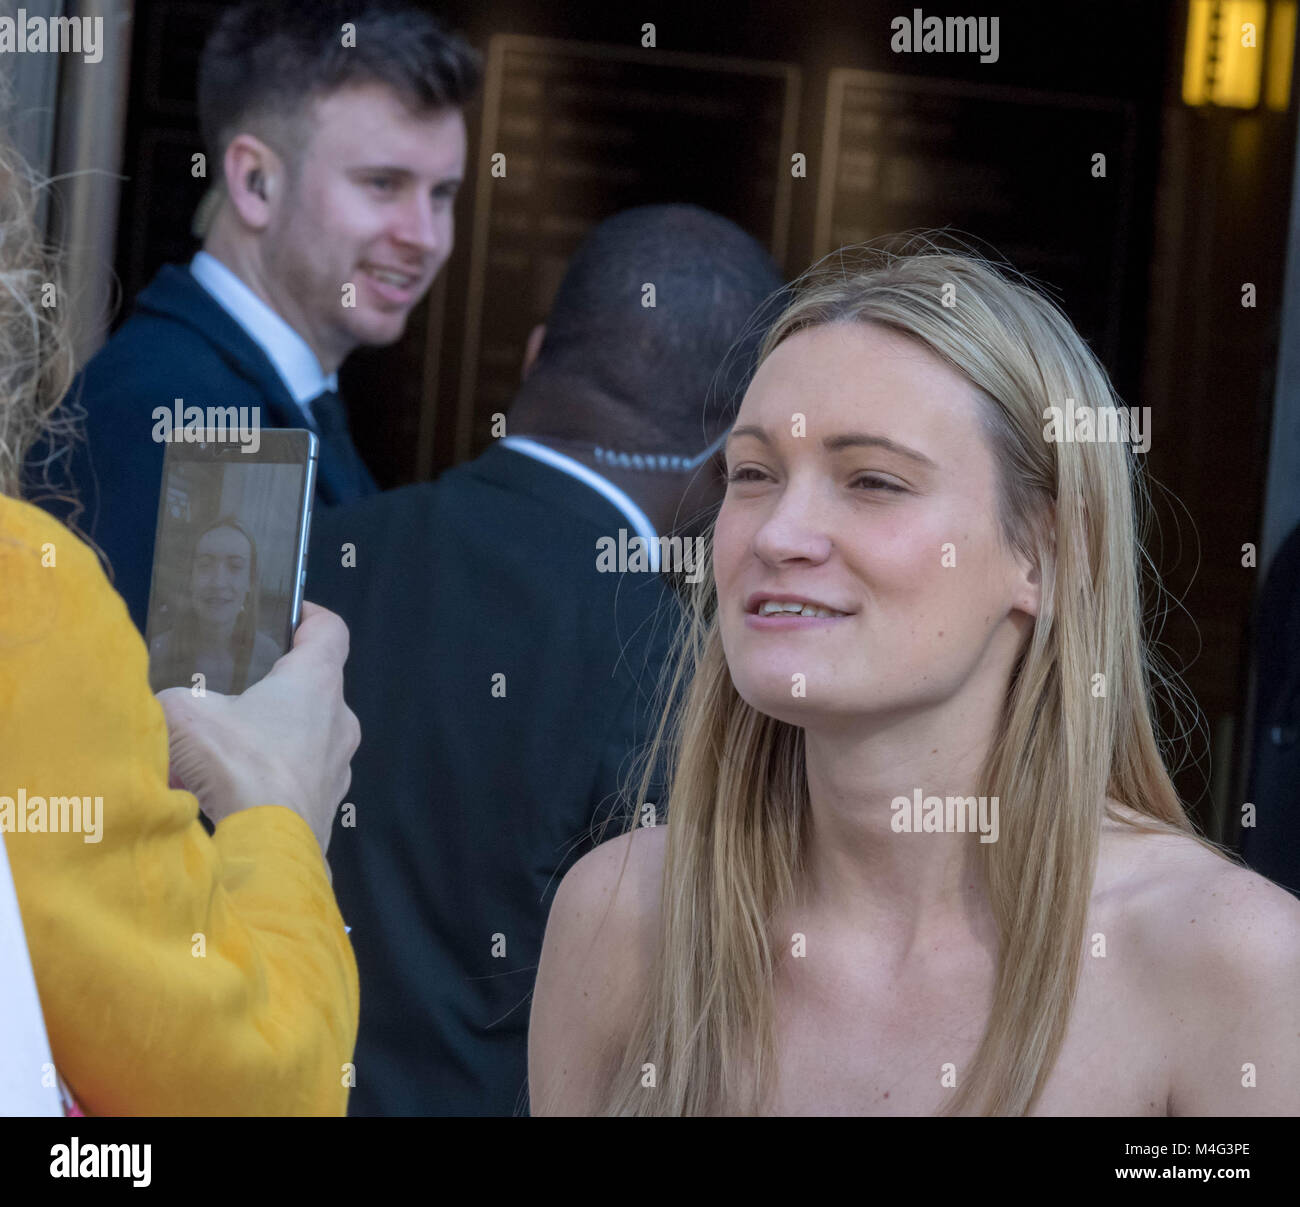 Amy Thomson' the designer outside her presentation at Fashion Scout for London Fashion Week, Credit: Ian Davidson/Alamy Live News Stock Photo